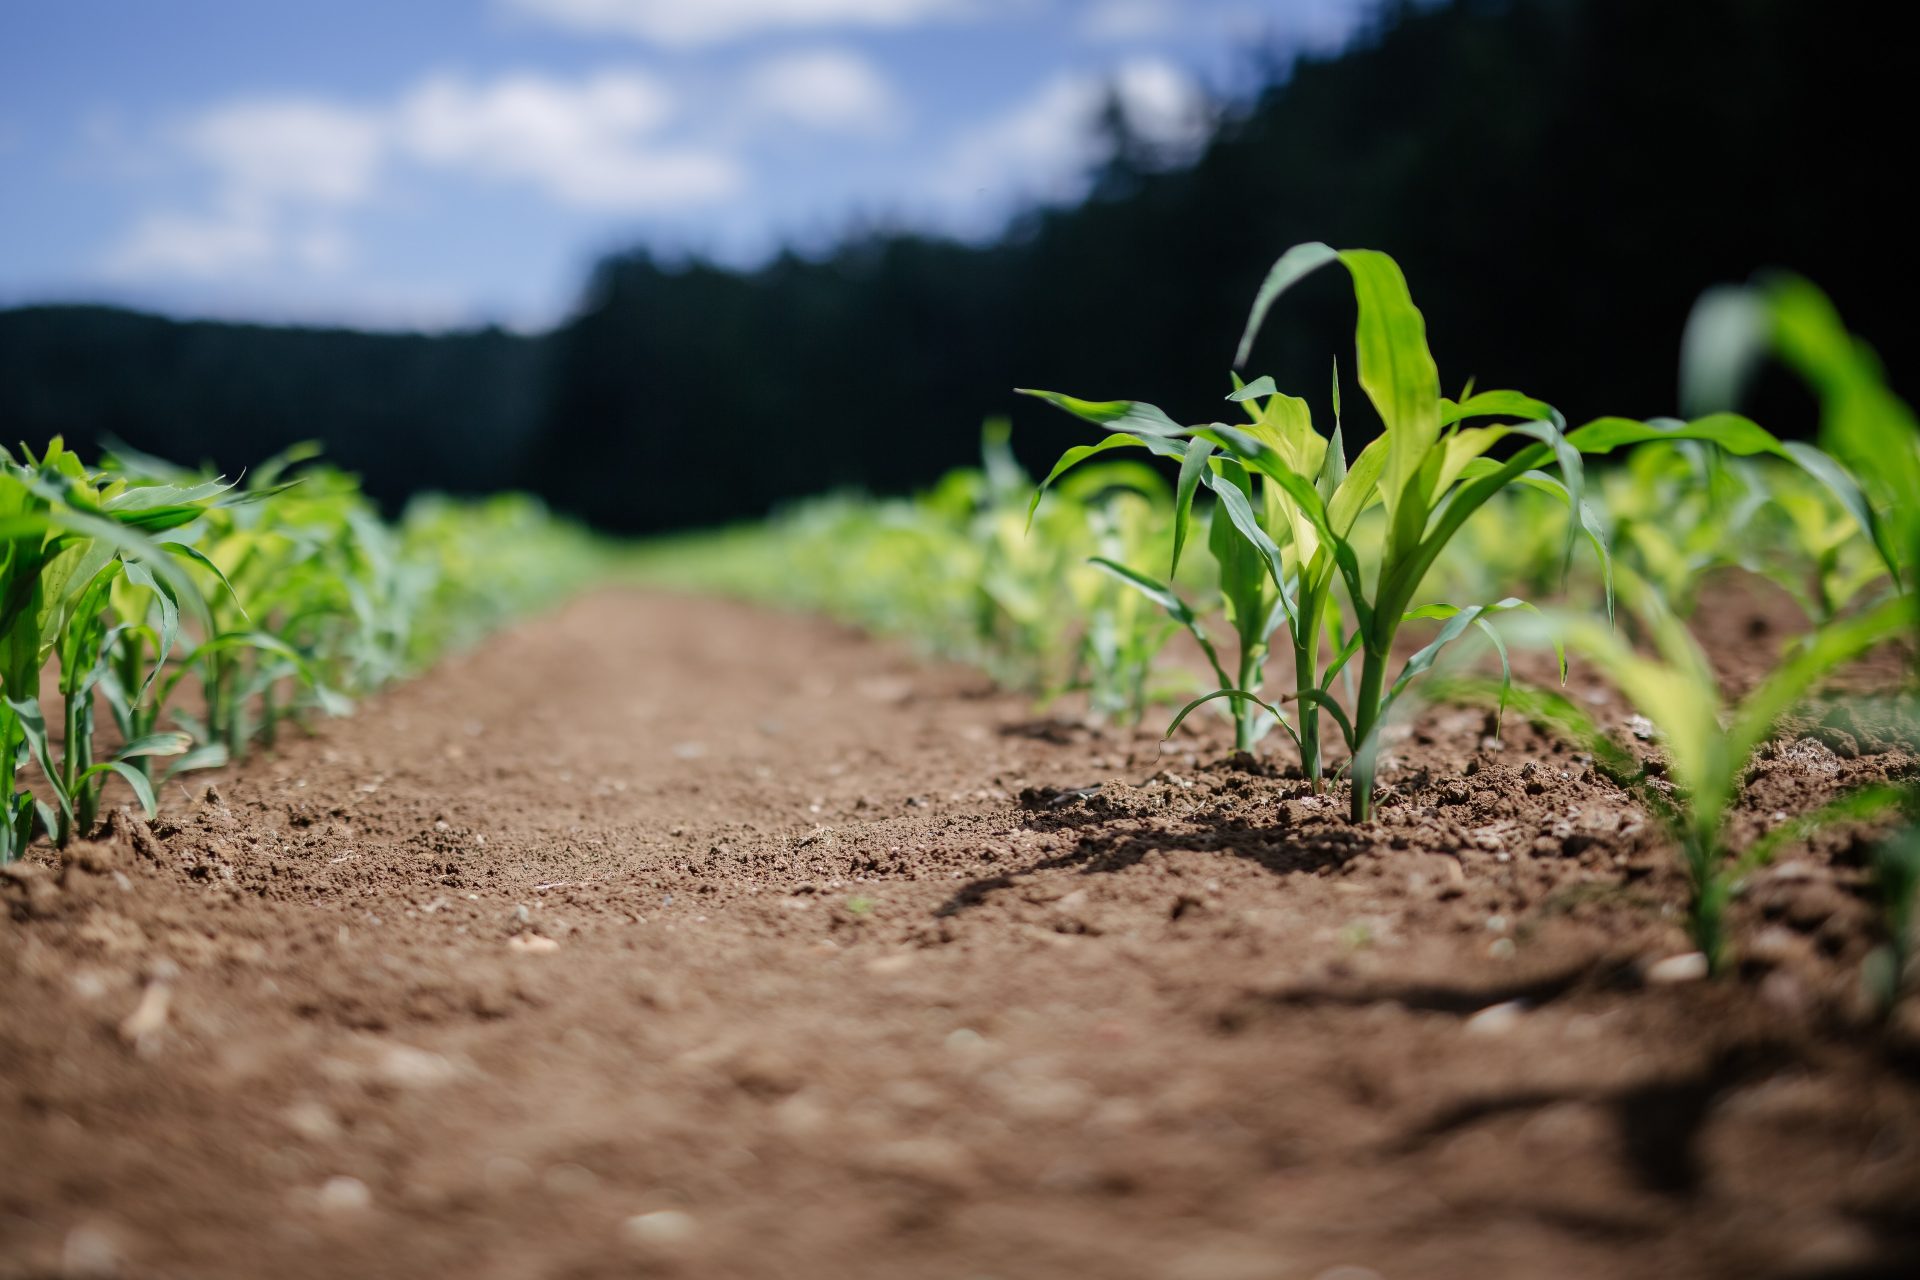 Conceptual picture of a field with small plants emerging from the soil